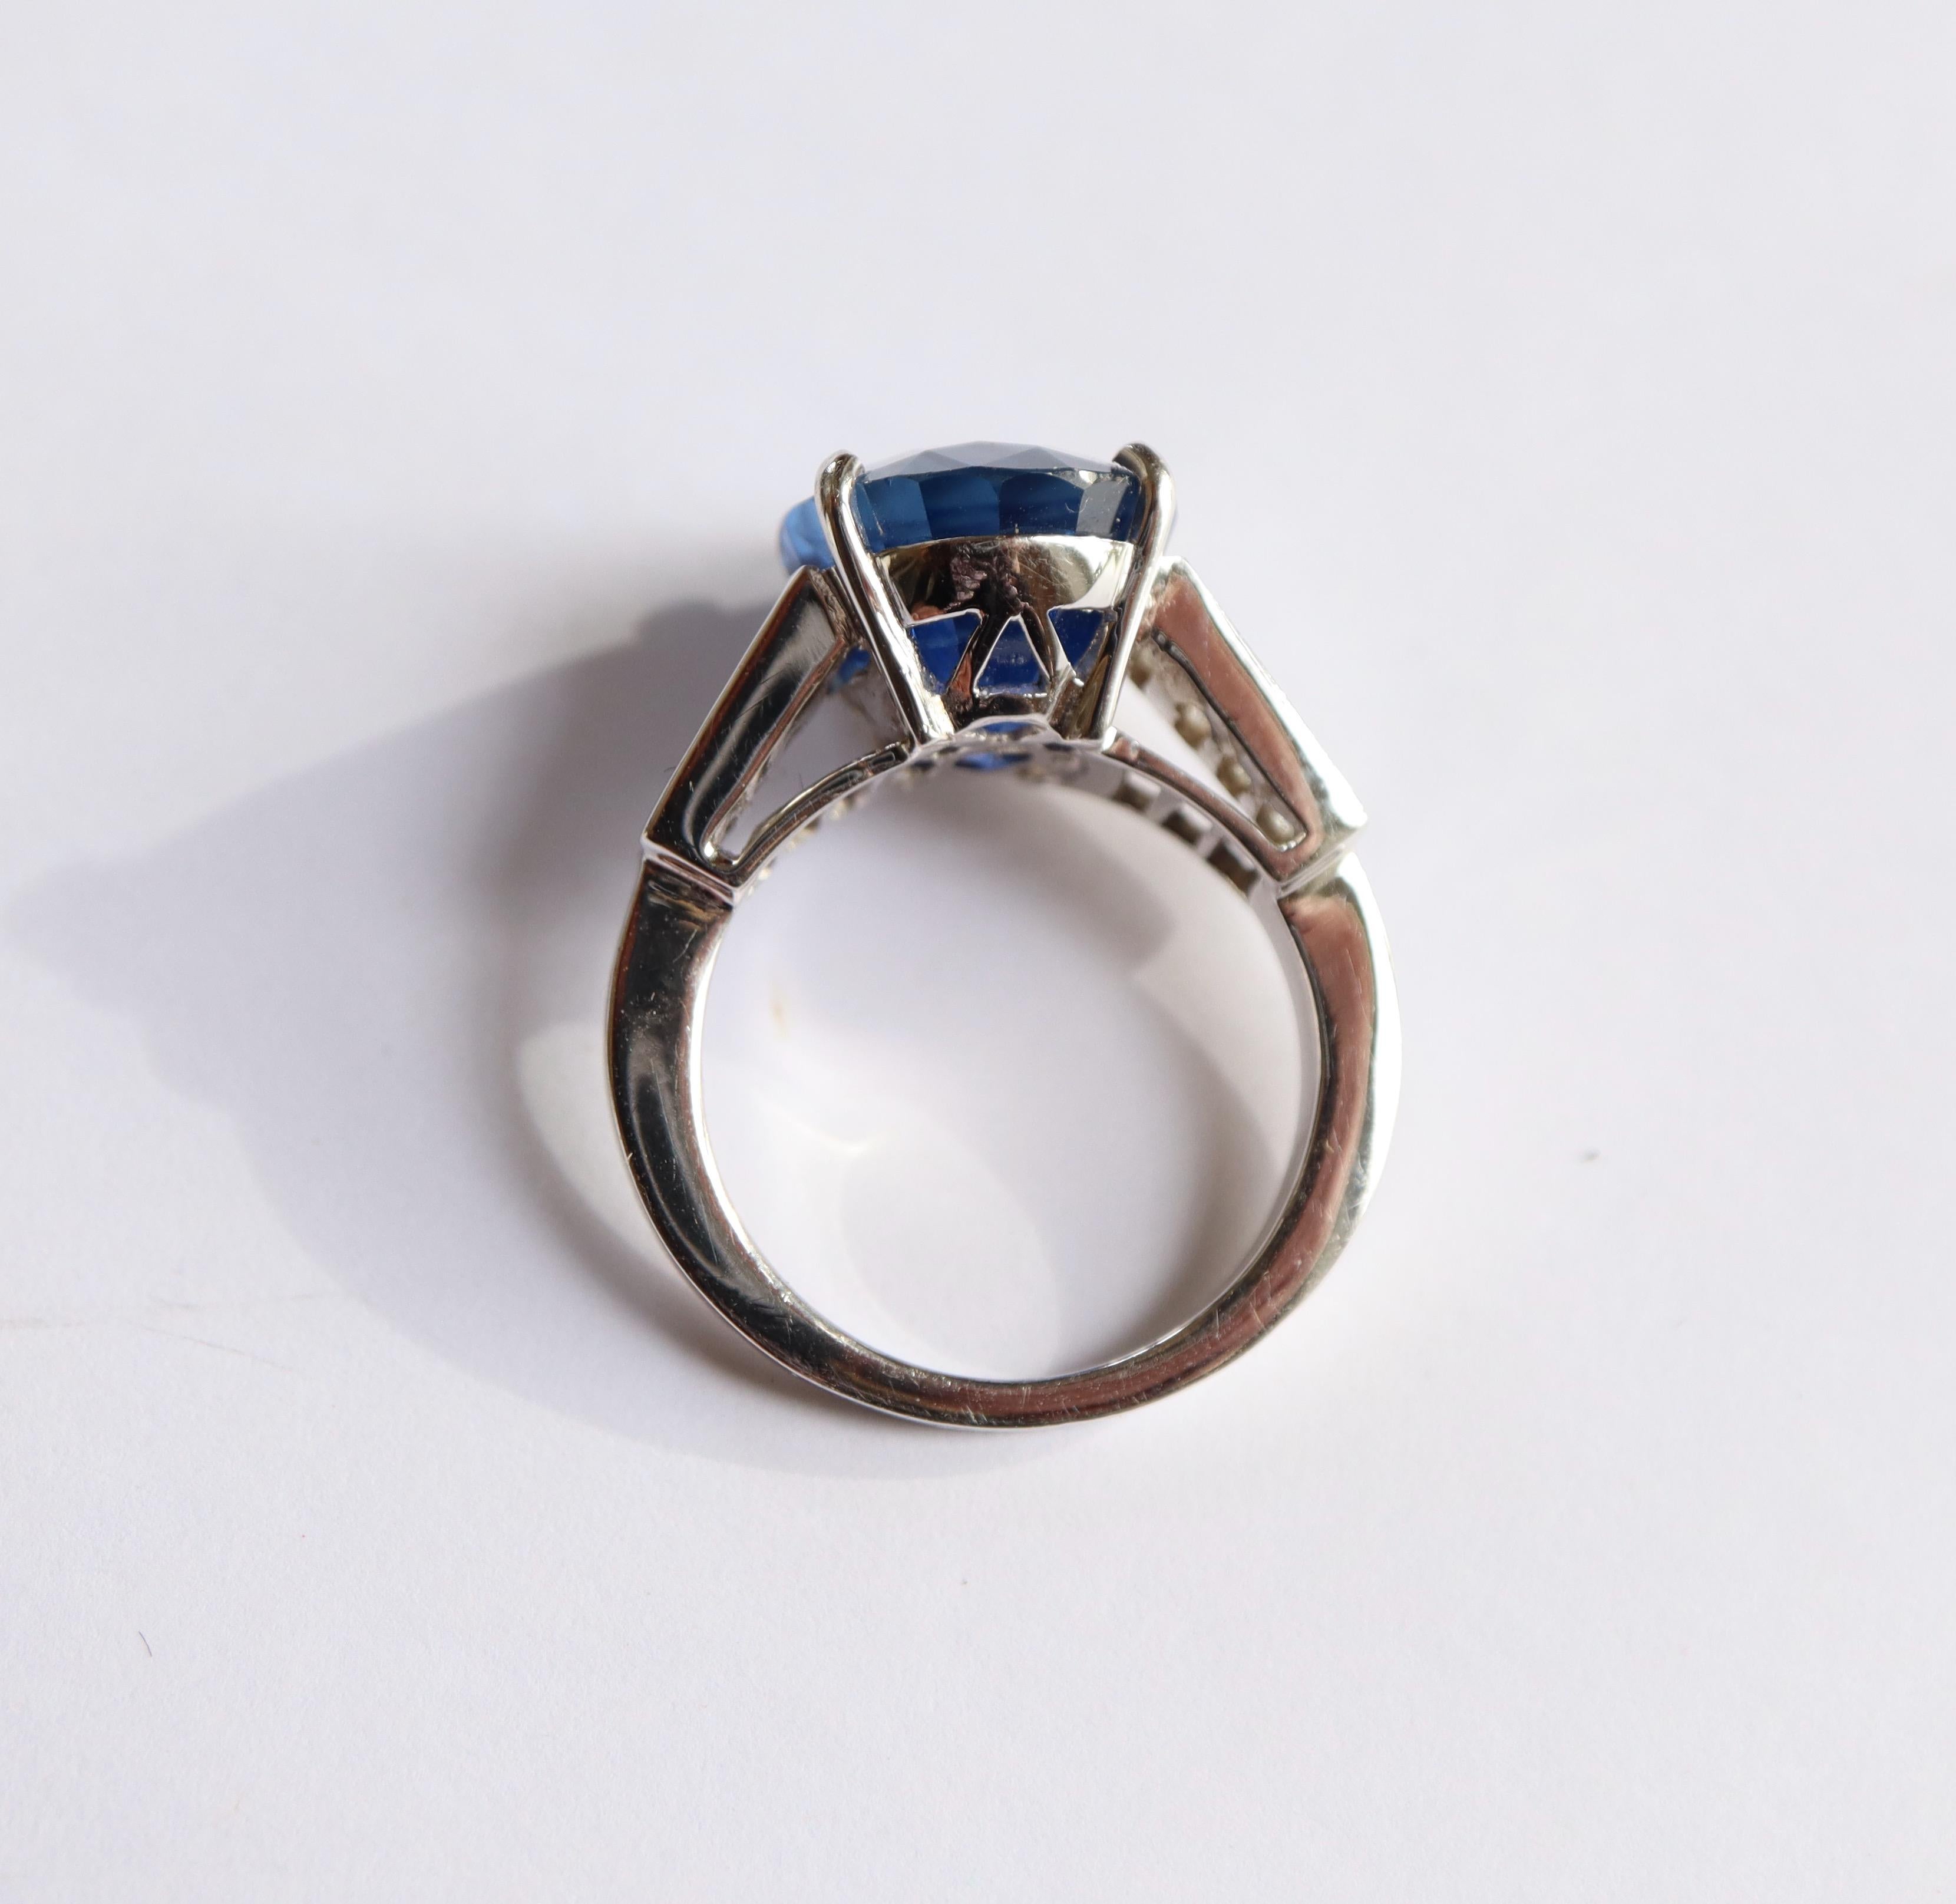 Emerald Cut Sapphire Ring 10.83 Carats Burmese Non Heated and Diamonds Ring For Sale